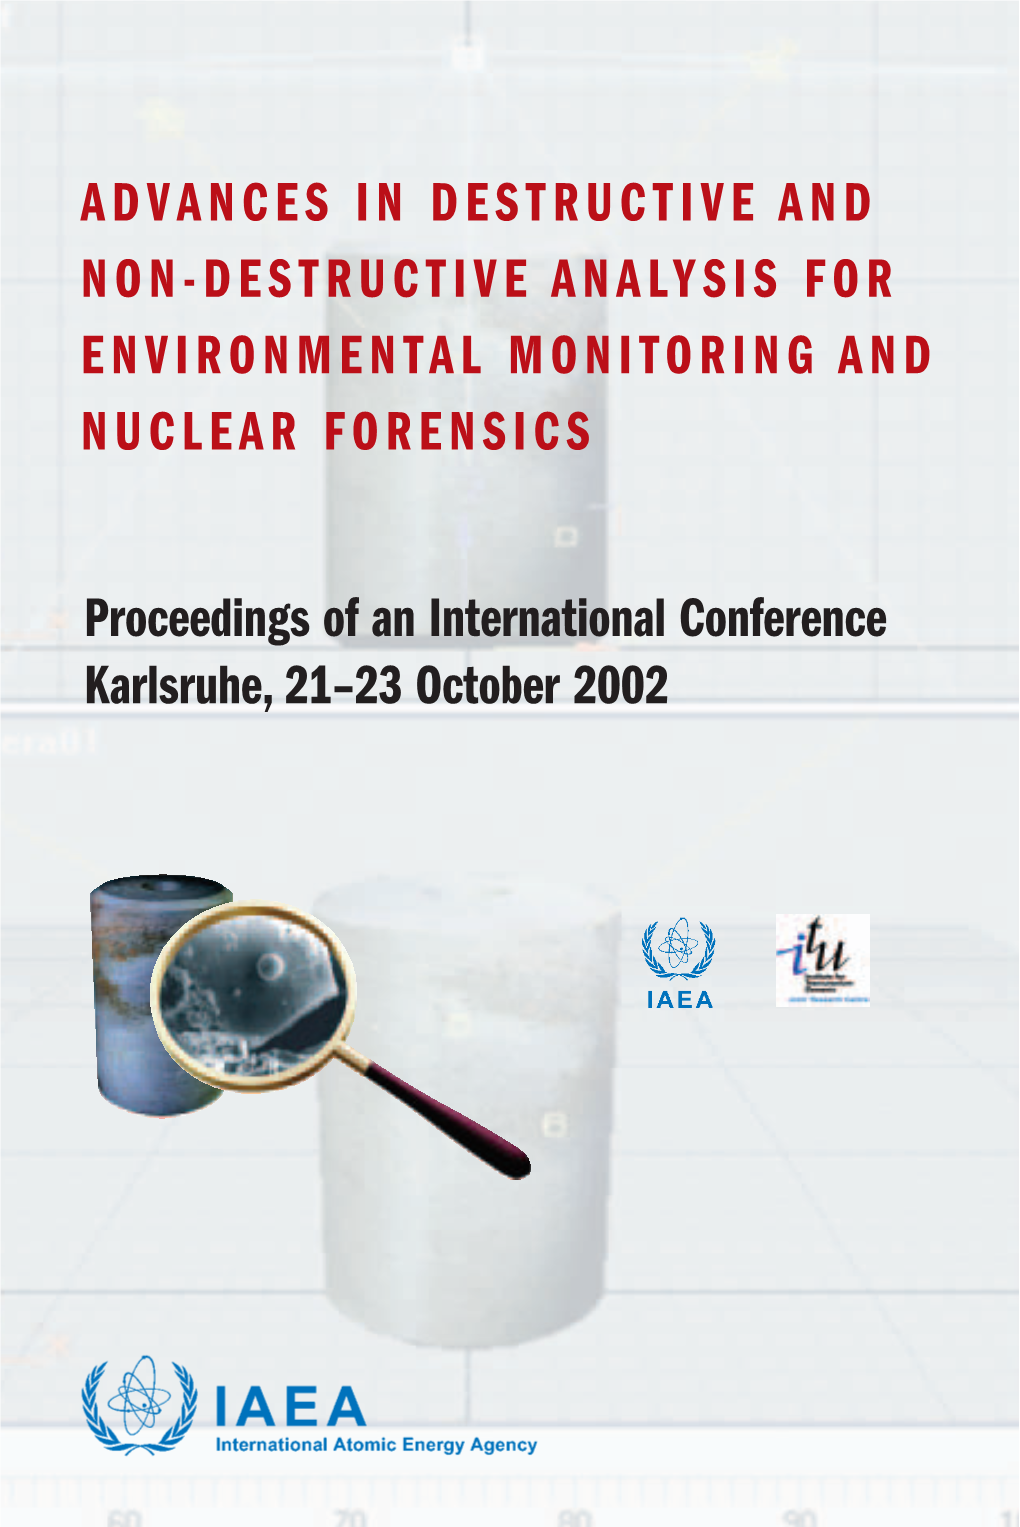 Advances in Destructive and Non-Destructive Analysis for Environmental Monitoring and Nuclear Forensics